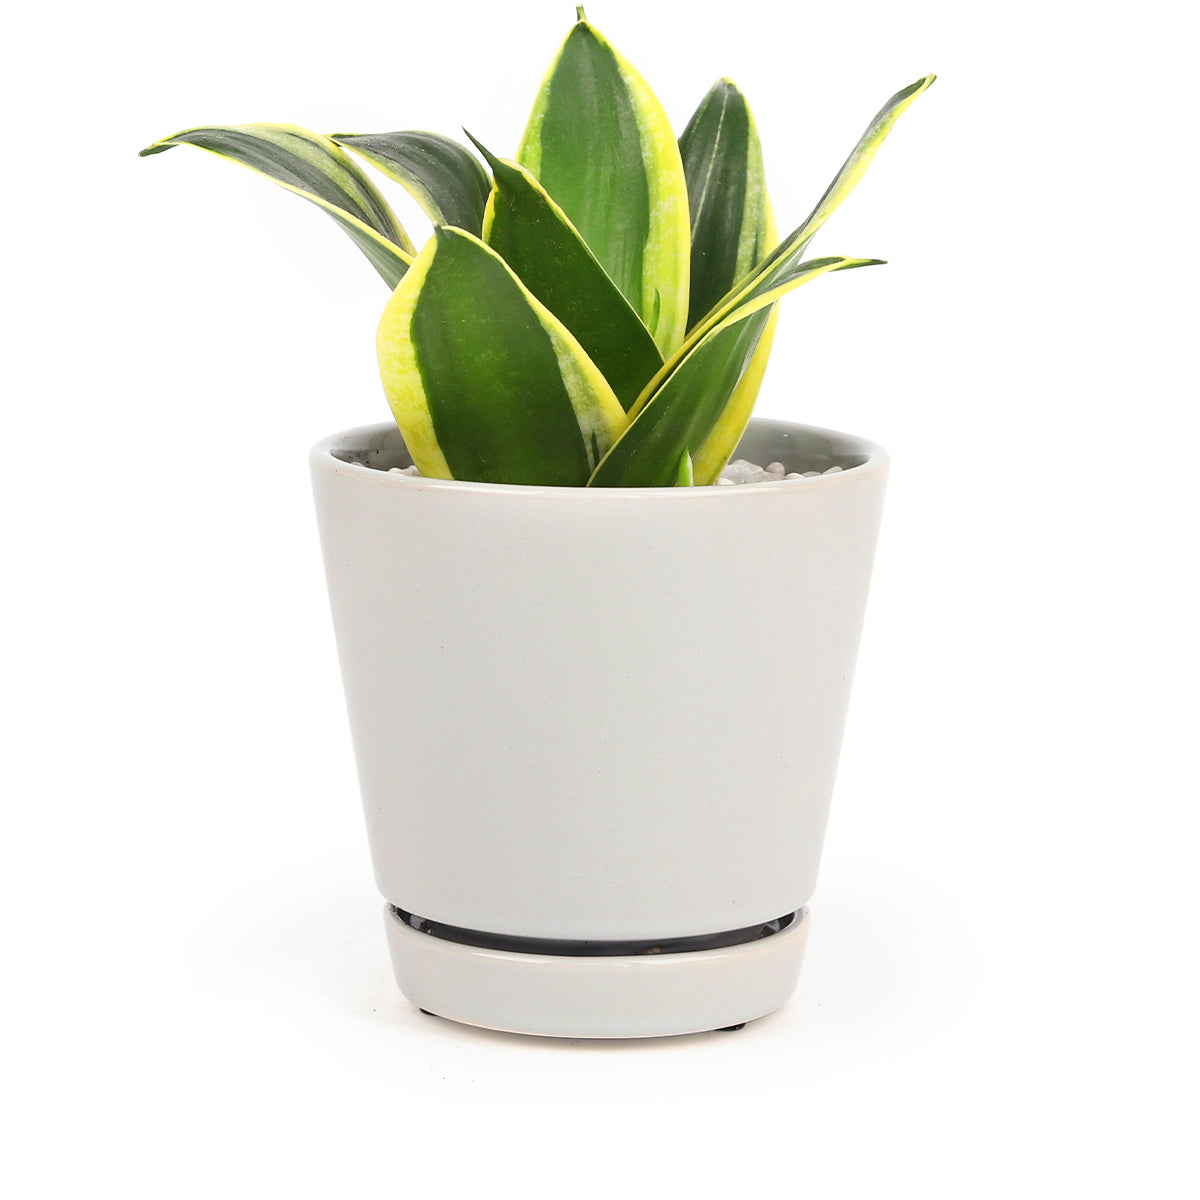 Gray modern pot, pot with saucer and drainage hole, minimalist pot for houseplants and succulents